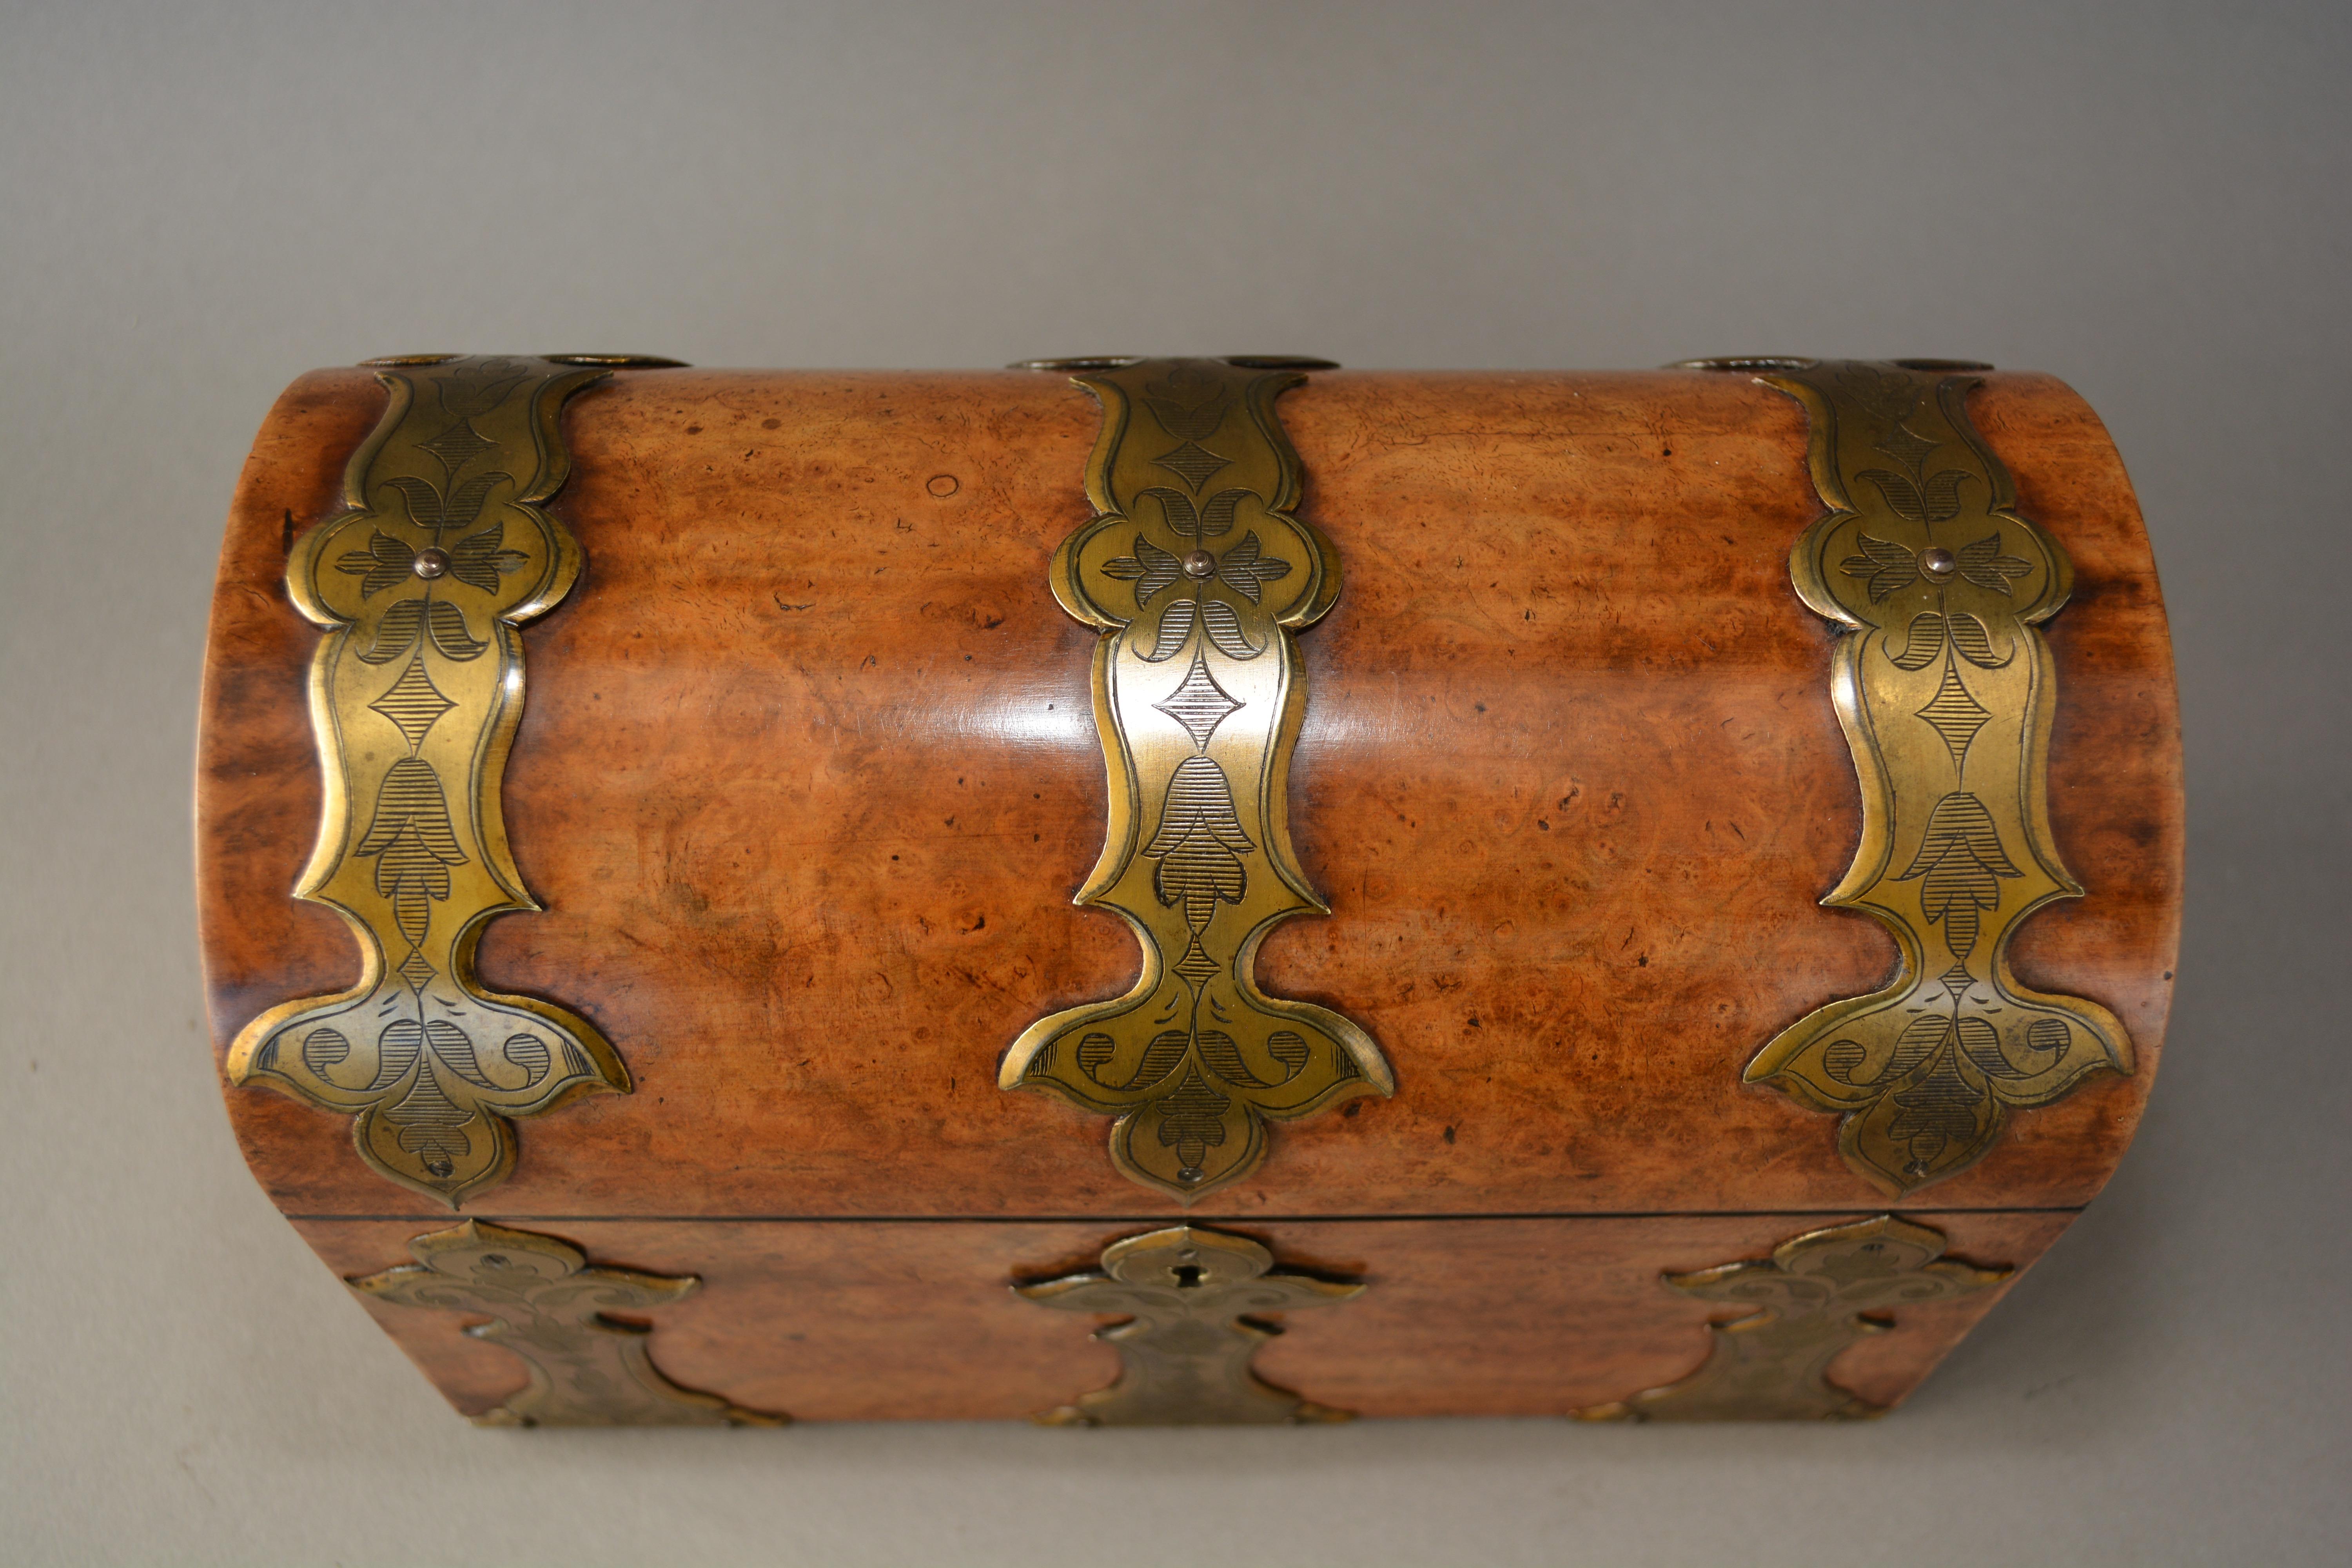 Superb quality Victorian dome topped stationary box in the Gothic revival taste. Hand made from figured walnut with brass strapping and compartmented interior. With super colour and patination. English and dating from circa 1870.